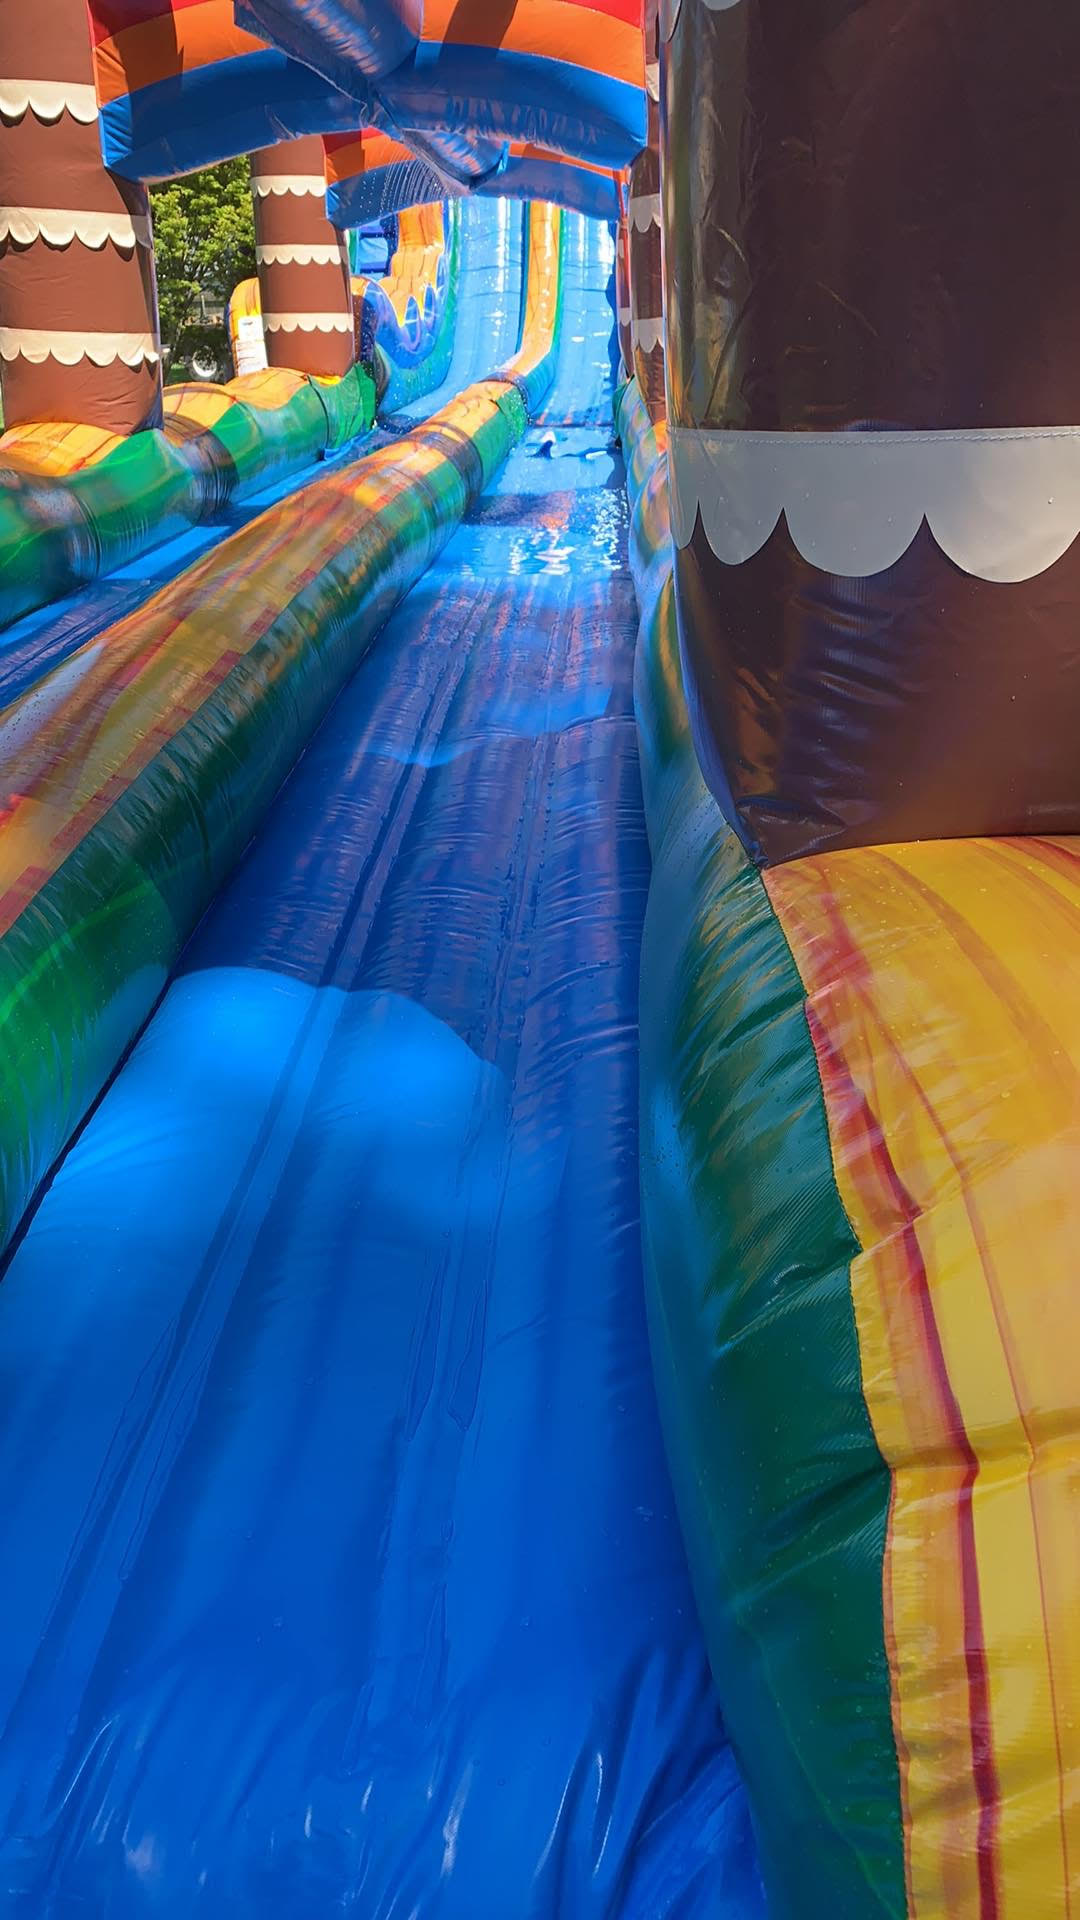 27 Foot Tall Aloha Water Slide With Slip n Slide - Destination Events